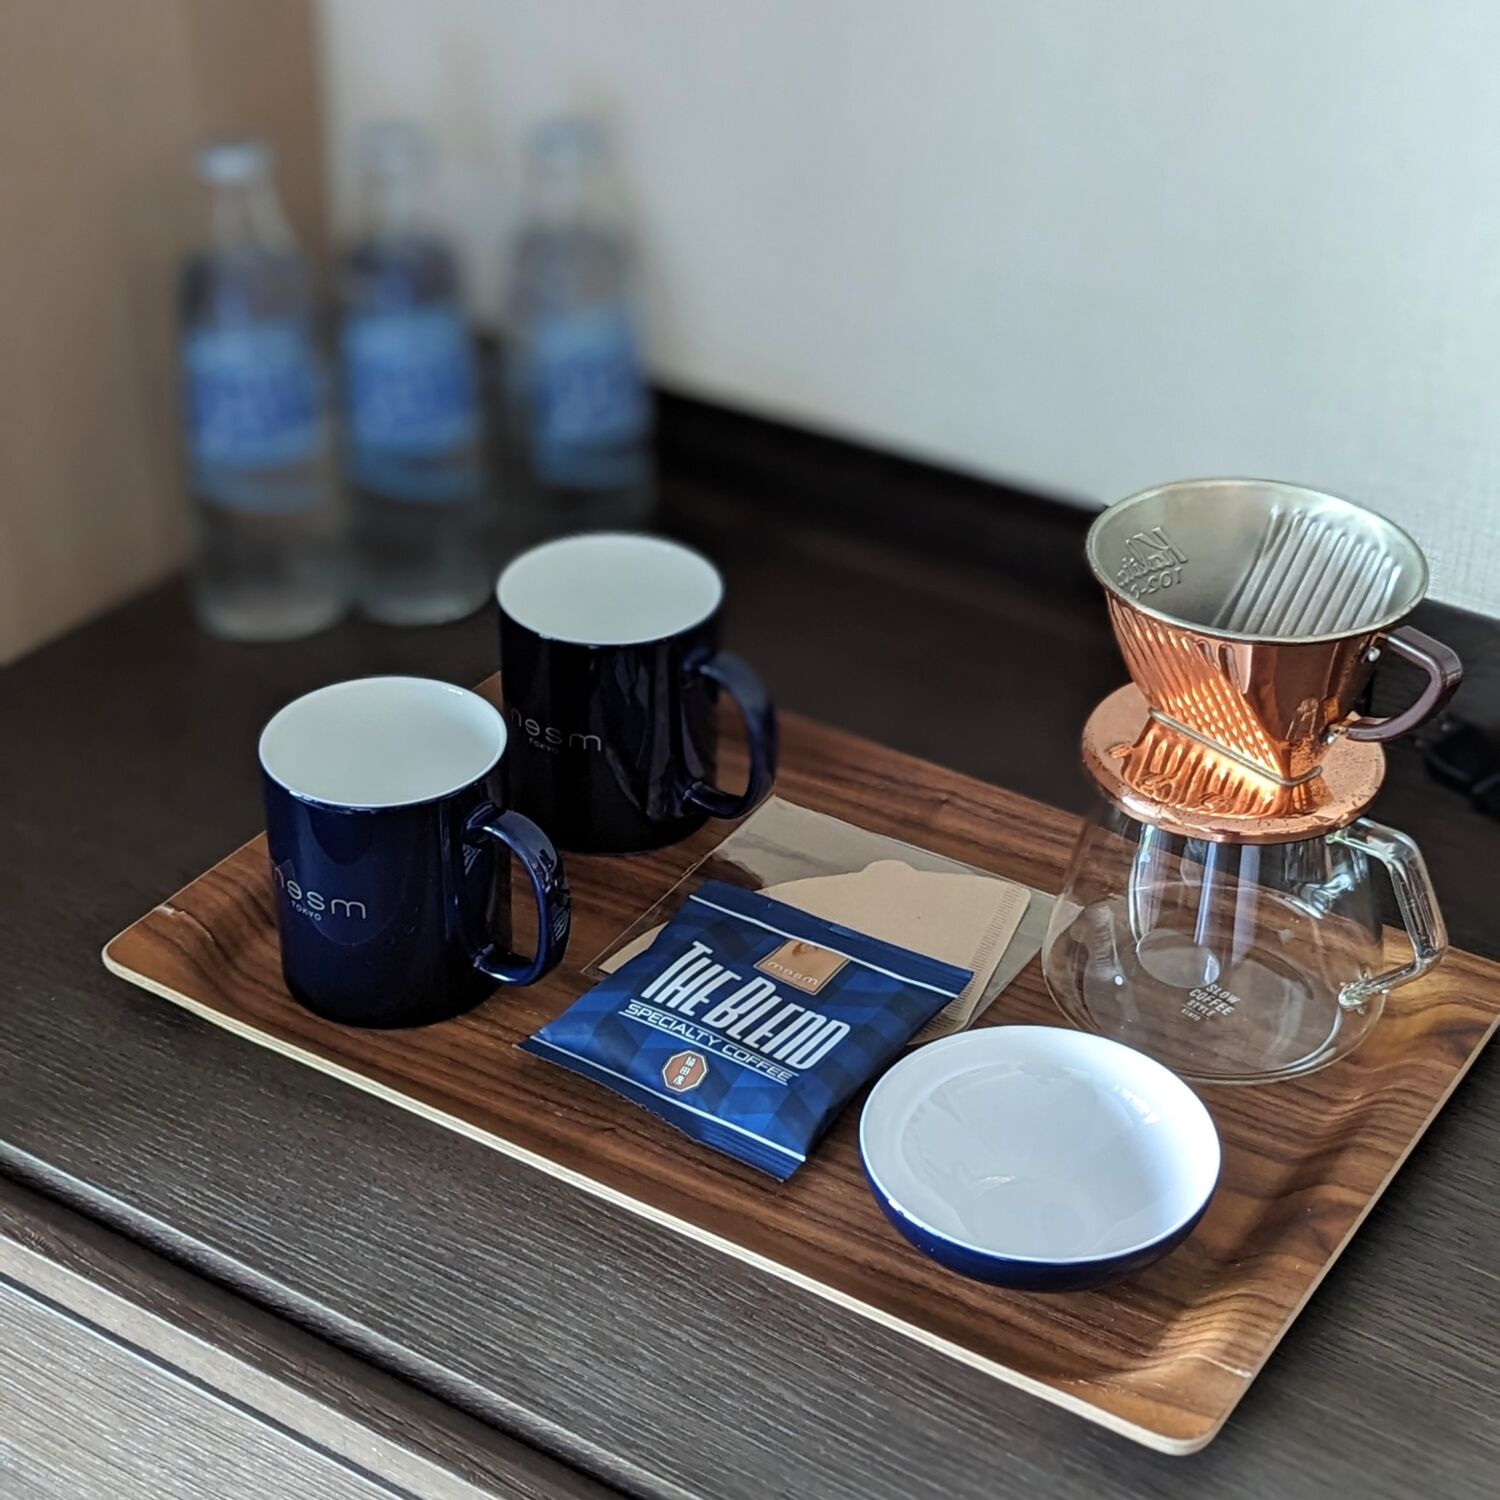 mesm Tokyo Autograph Collection Coffee Amenities